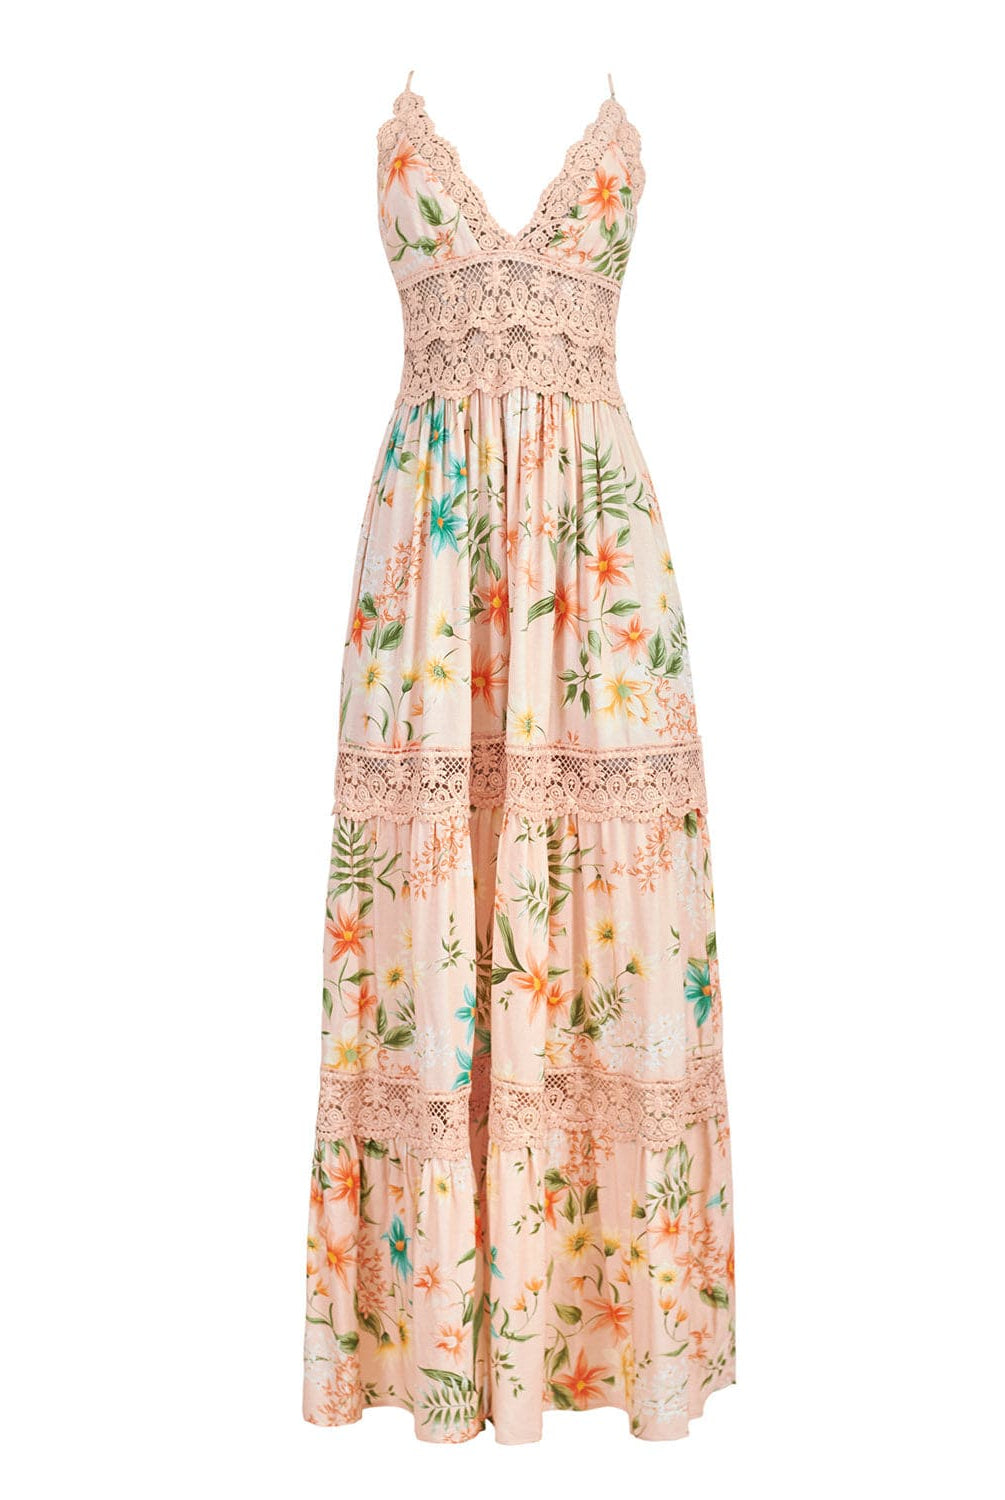 A floor length dress with a tropical print against a white wall. 